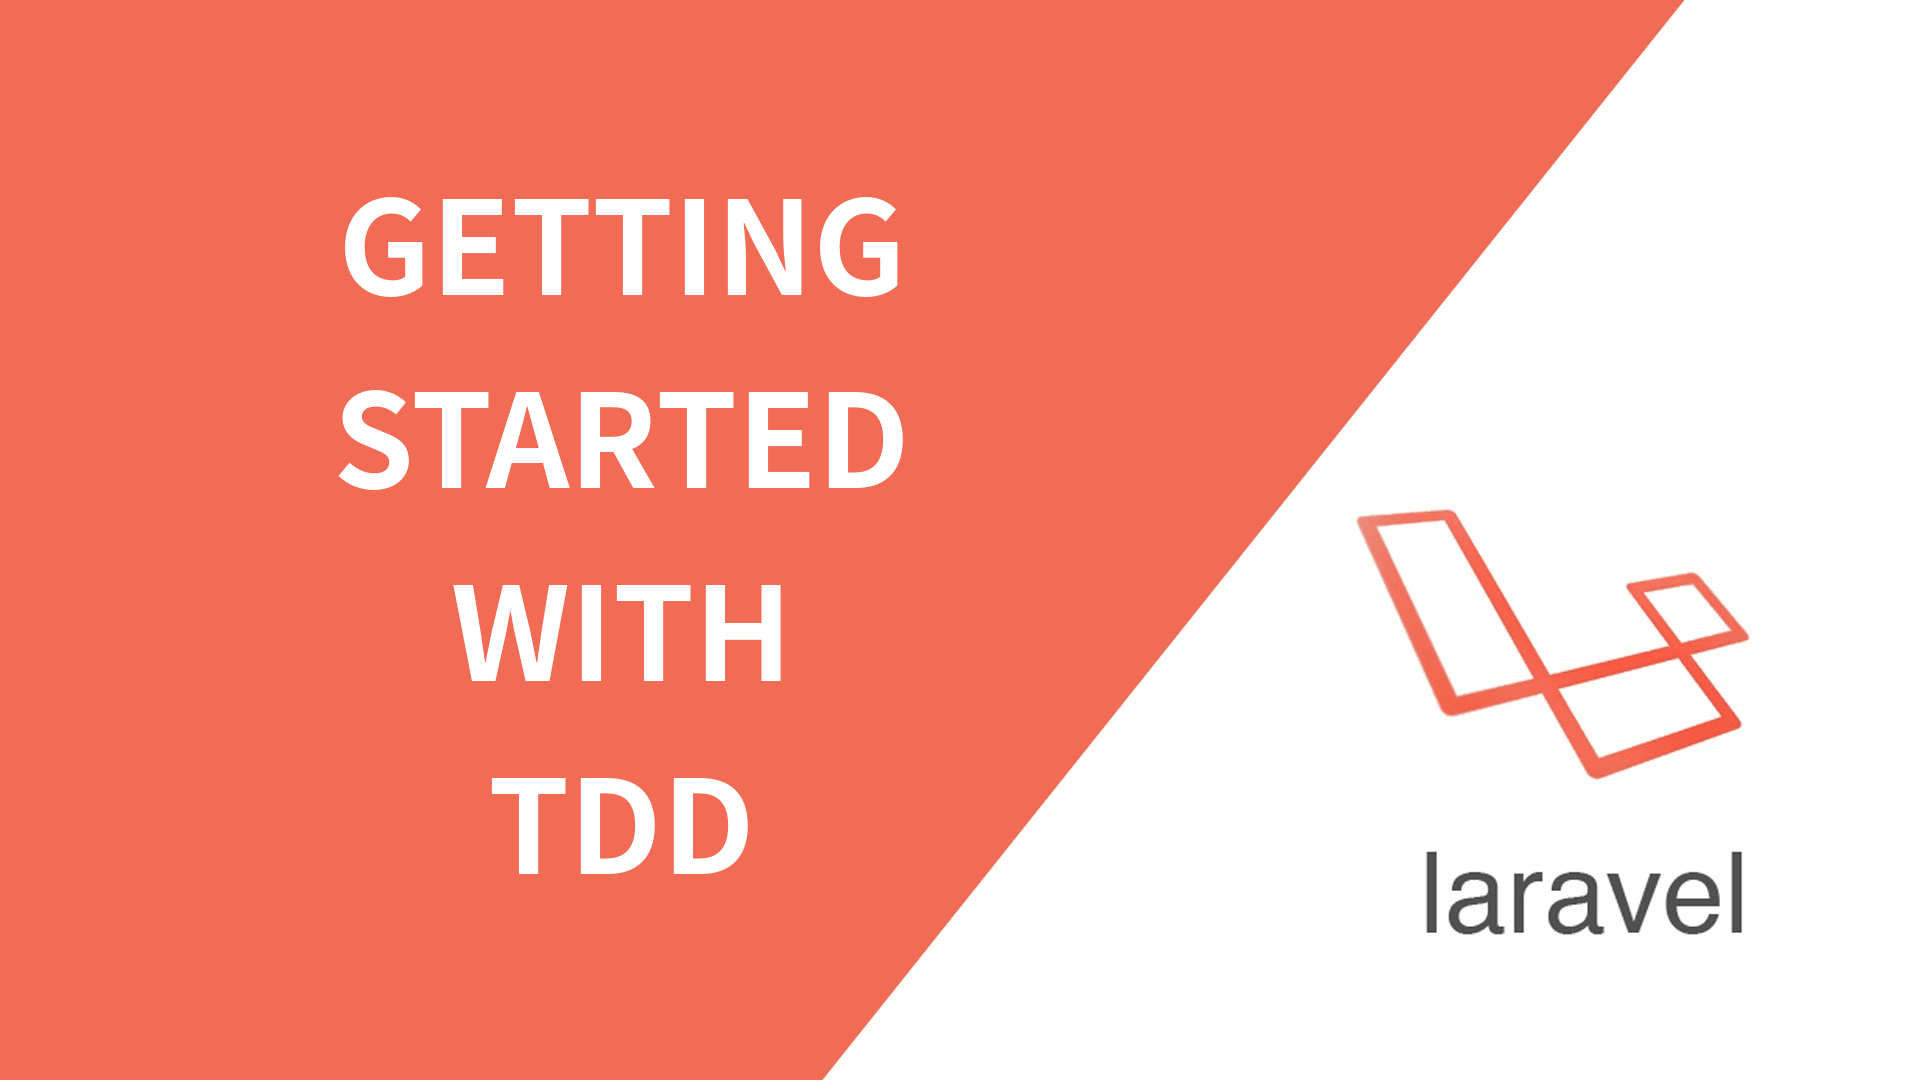 Crud Logo - Getting started with TDD in Laravel with CRUD Example